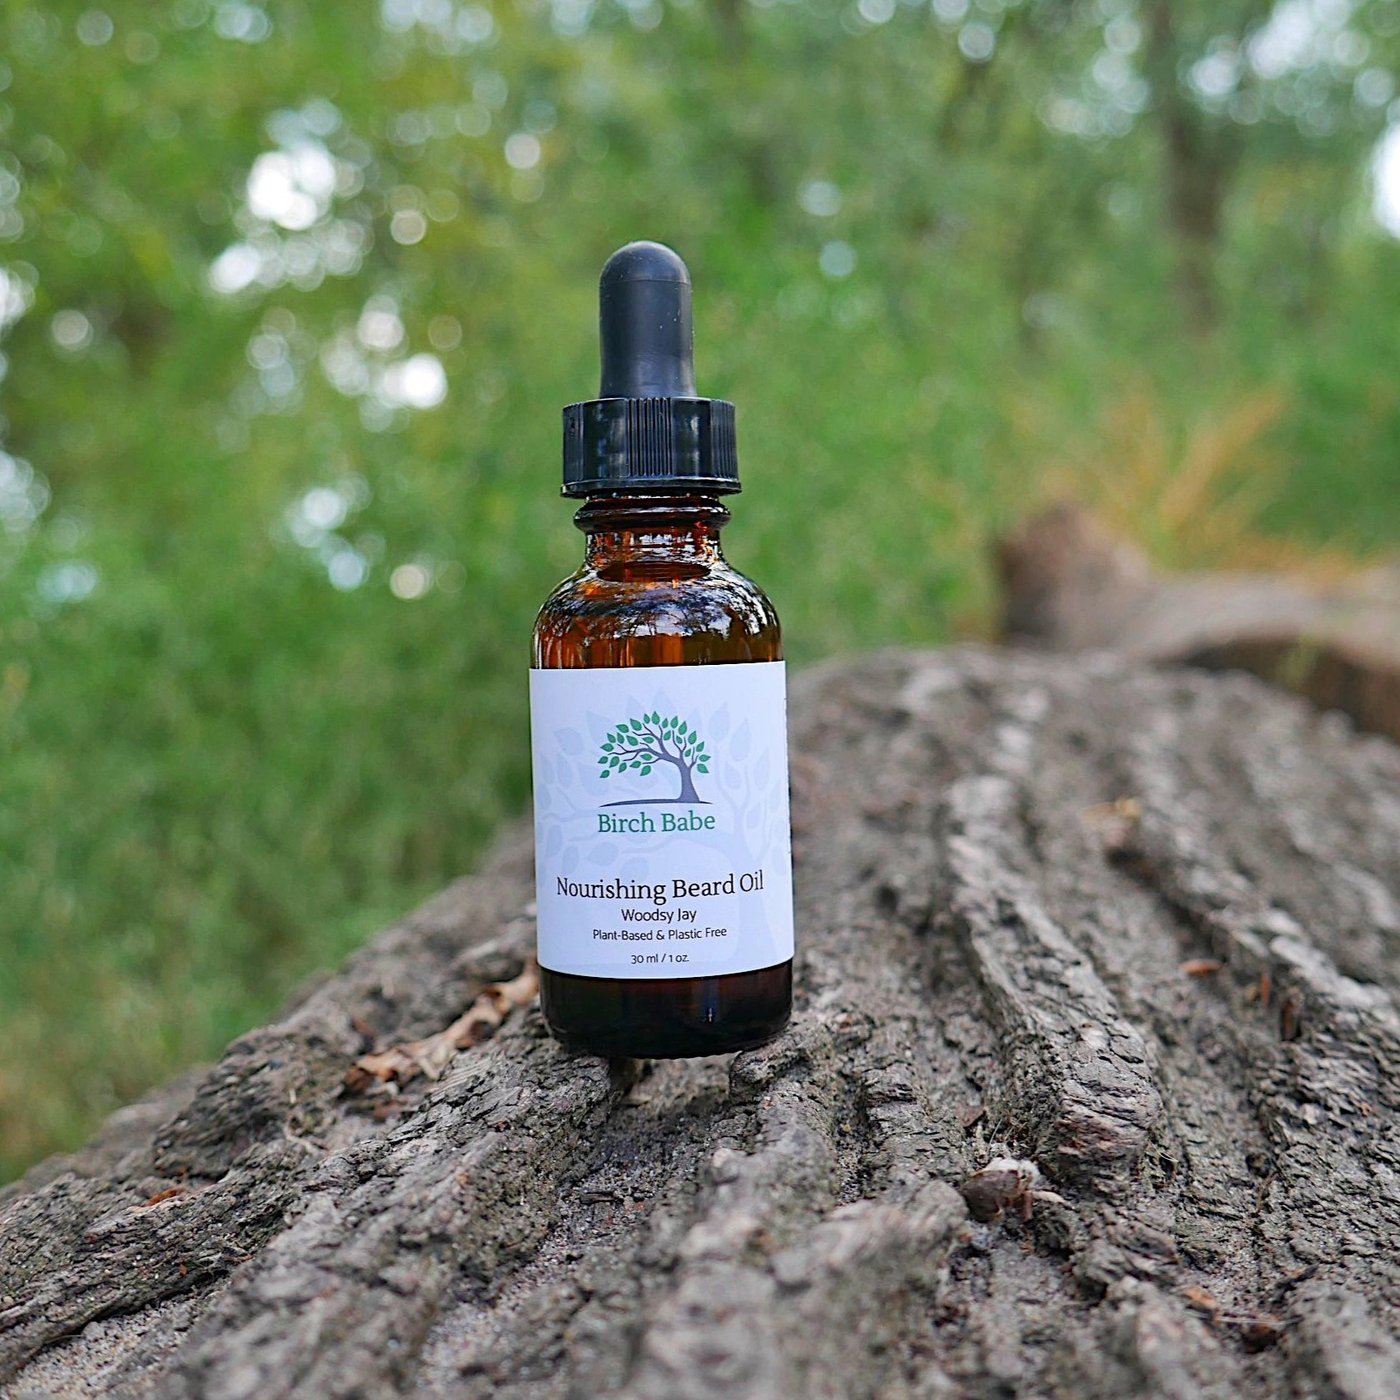 Beard Oil - Woodsy Jay - by Birch Babe Naturals Grooming Birch Babe Naturals Prettycleanshop